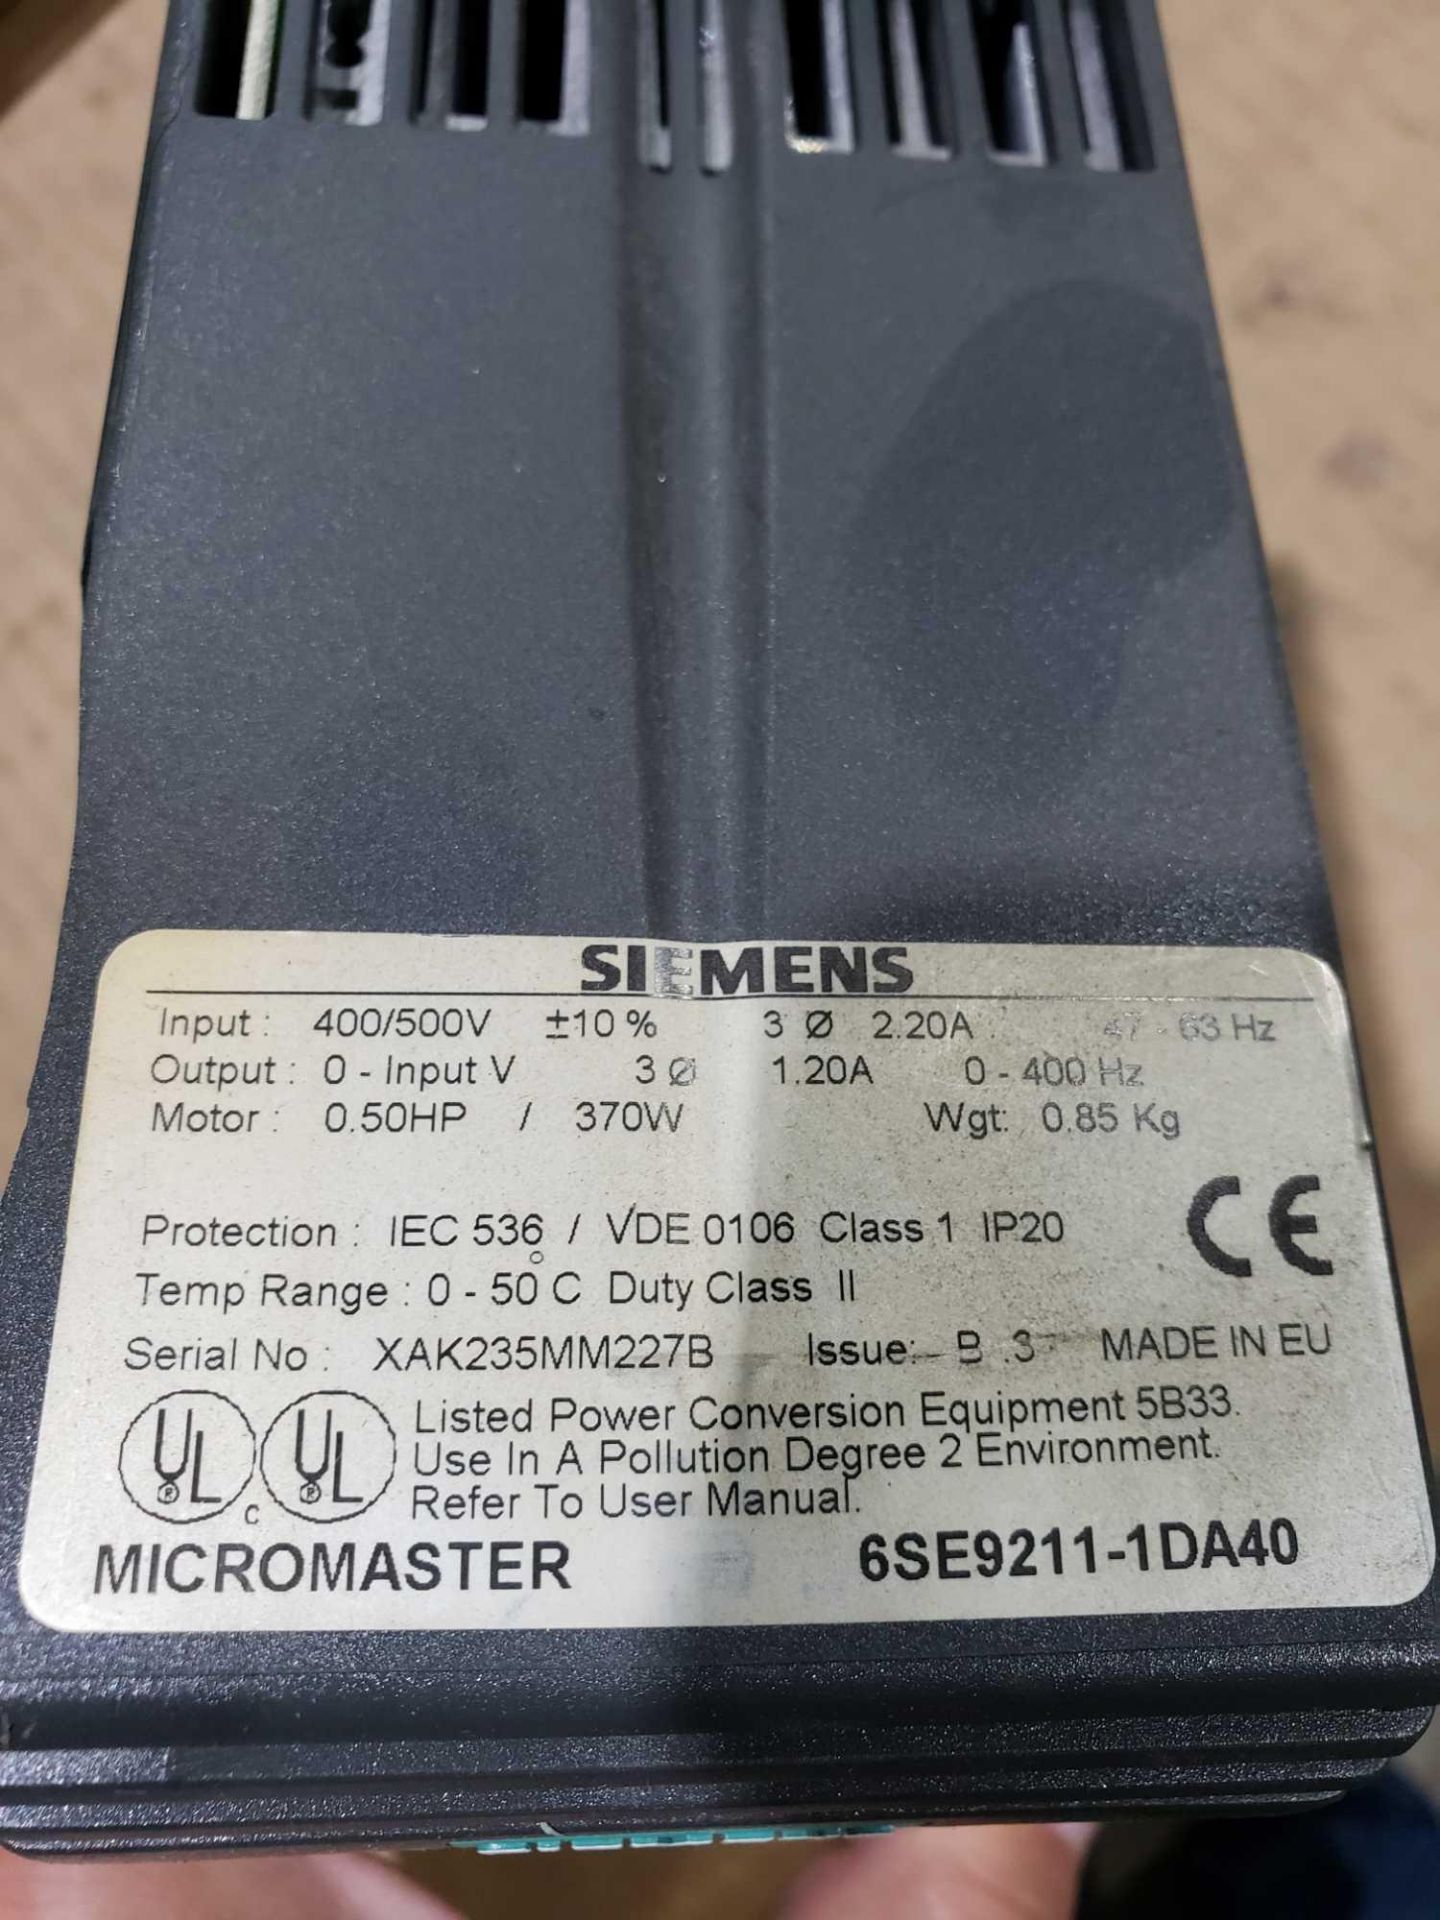 Qty 4 Siemens Micromaster model 6SE9211-1DA40. Plastic cases are damaged during removal. Parts units - Image 2 of 2